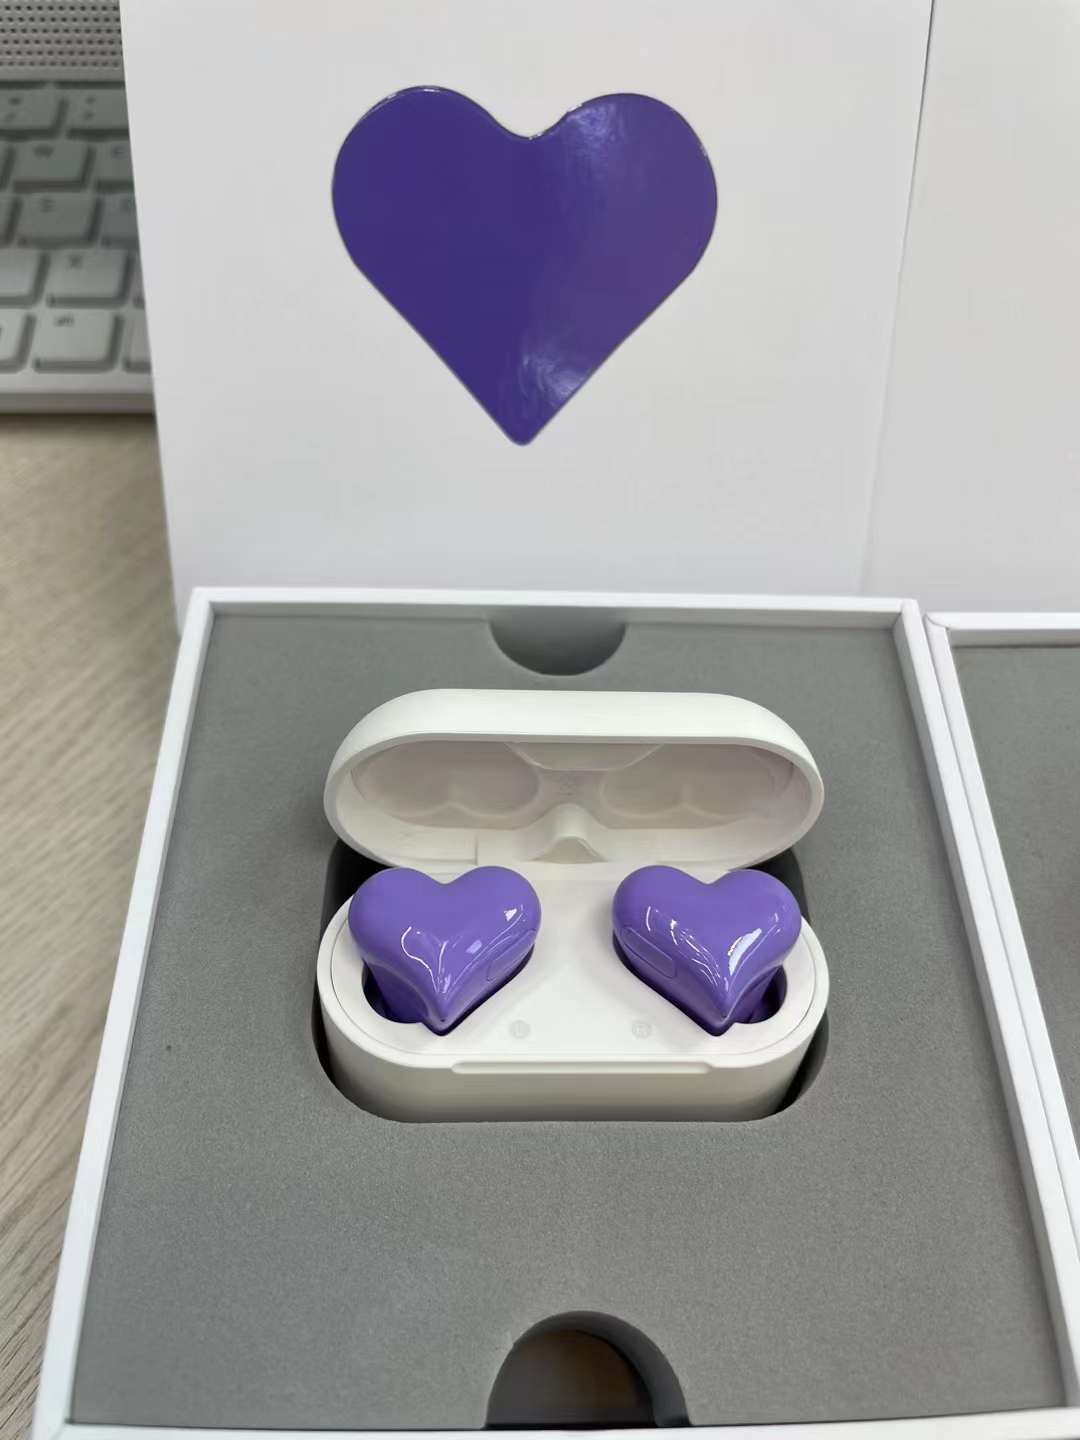 Heart Model Buds Pro Tws Stereo Hands Wireless Charging Headphones With Chox Power Display